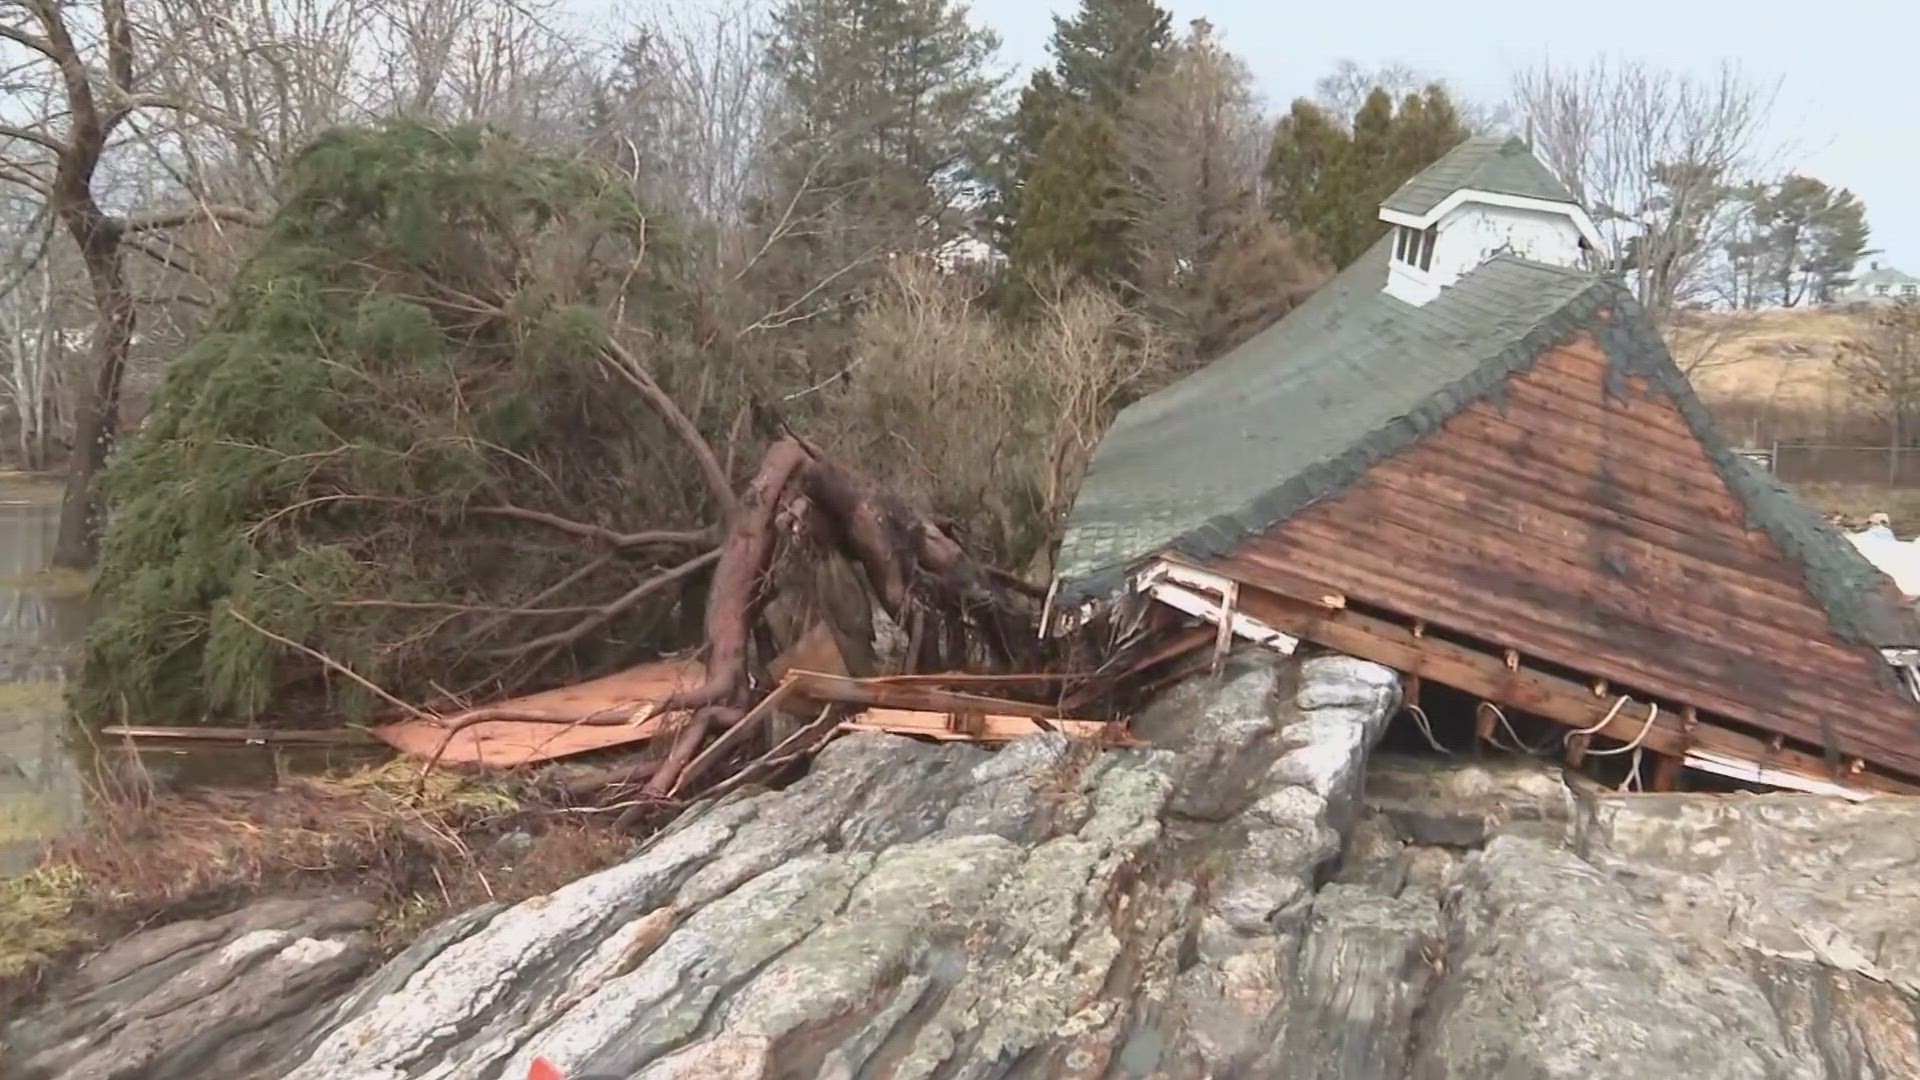 An overnight storm battered much of the state, bringing a storm surge to coastal Maine towns while many are still recovering from the previous winter storm.